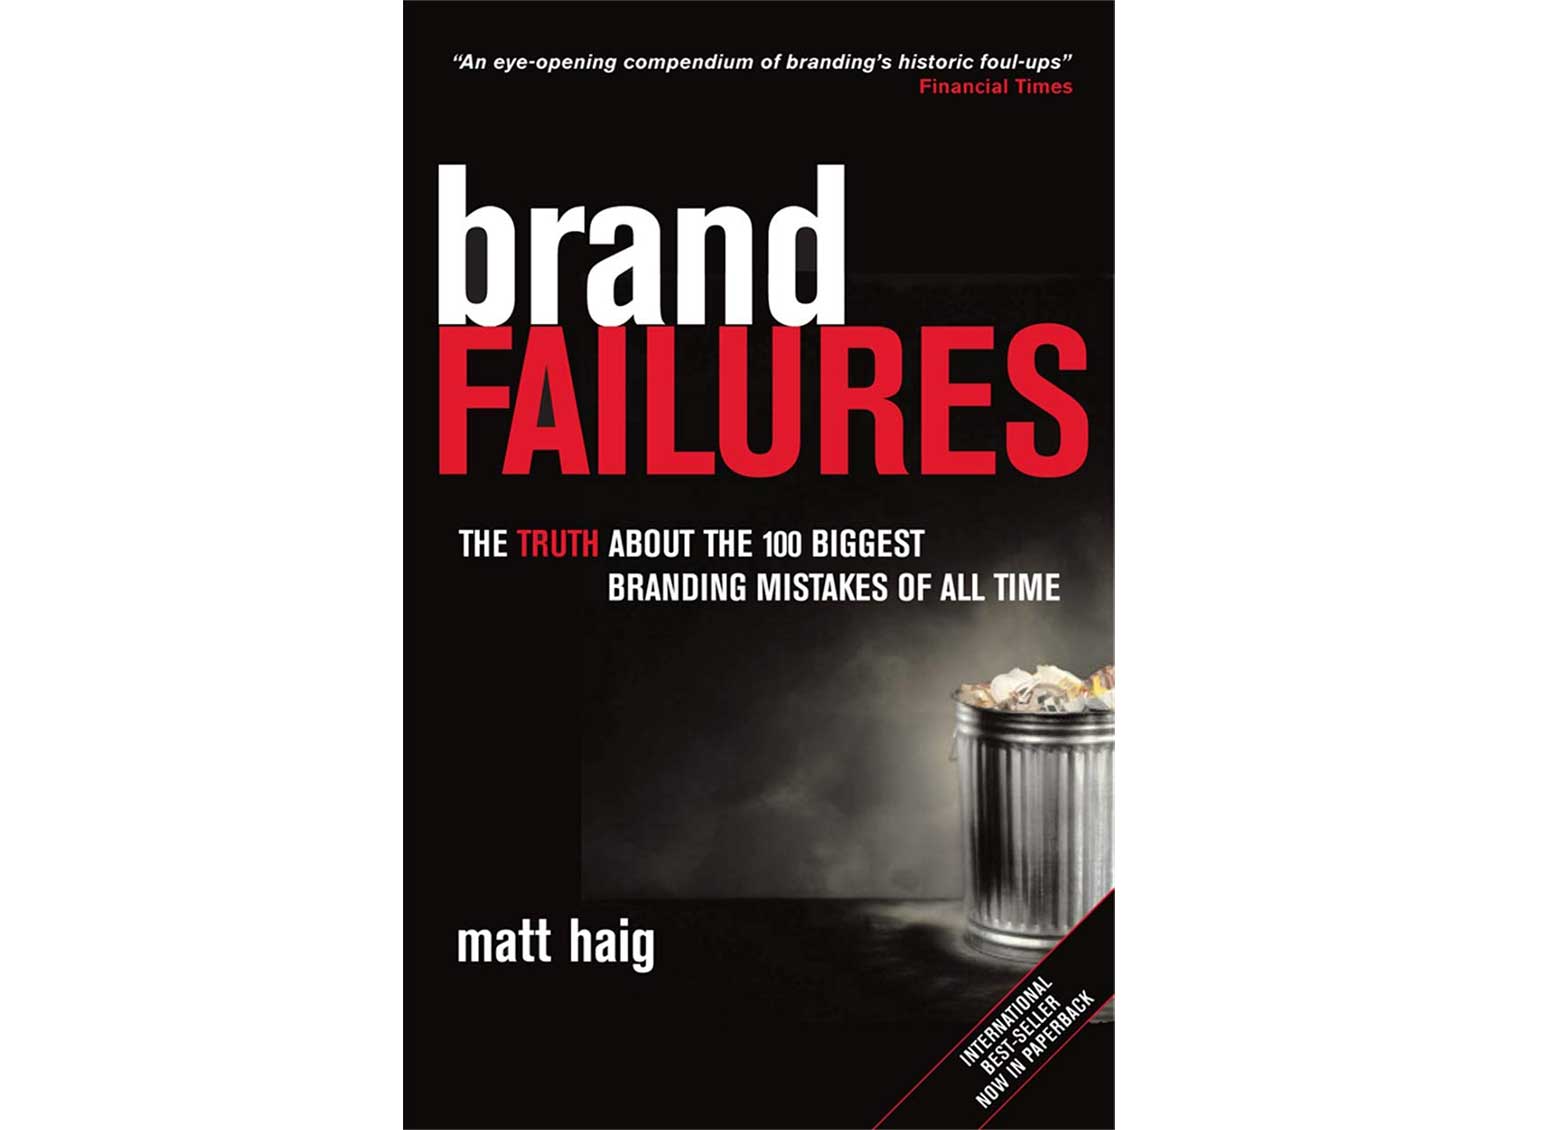 Brand Failures - The Truth About The 100 Biggest Branding Mistakes of All Times